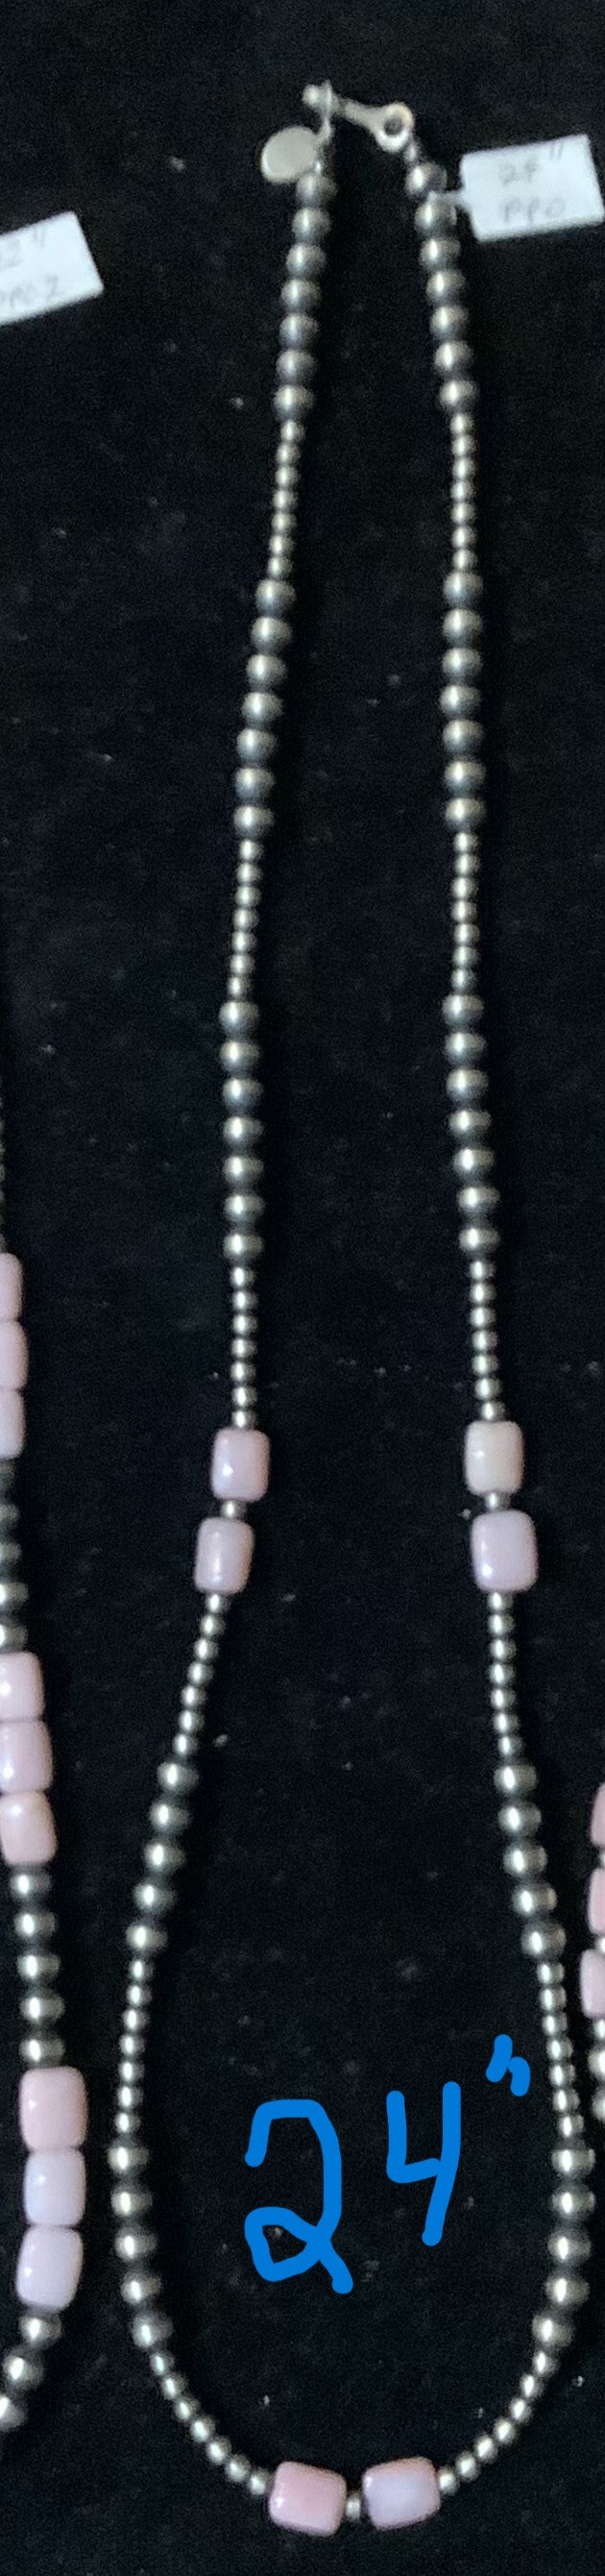 Navajo Pearl and Peruvian Opal Necklaces